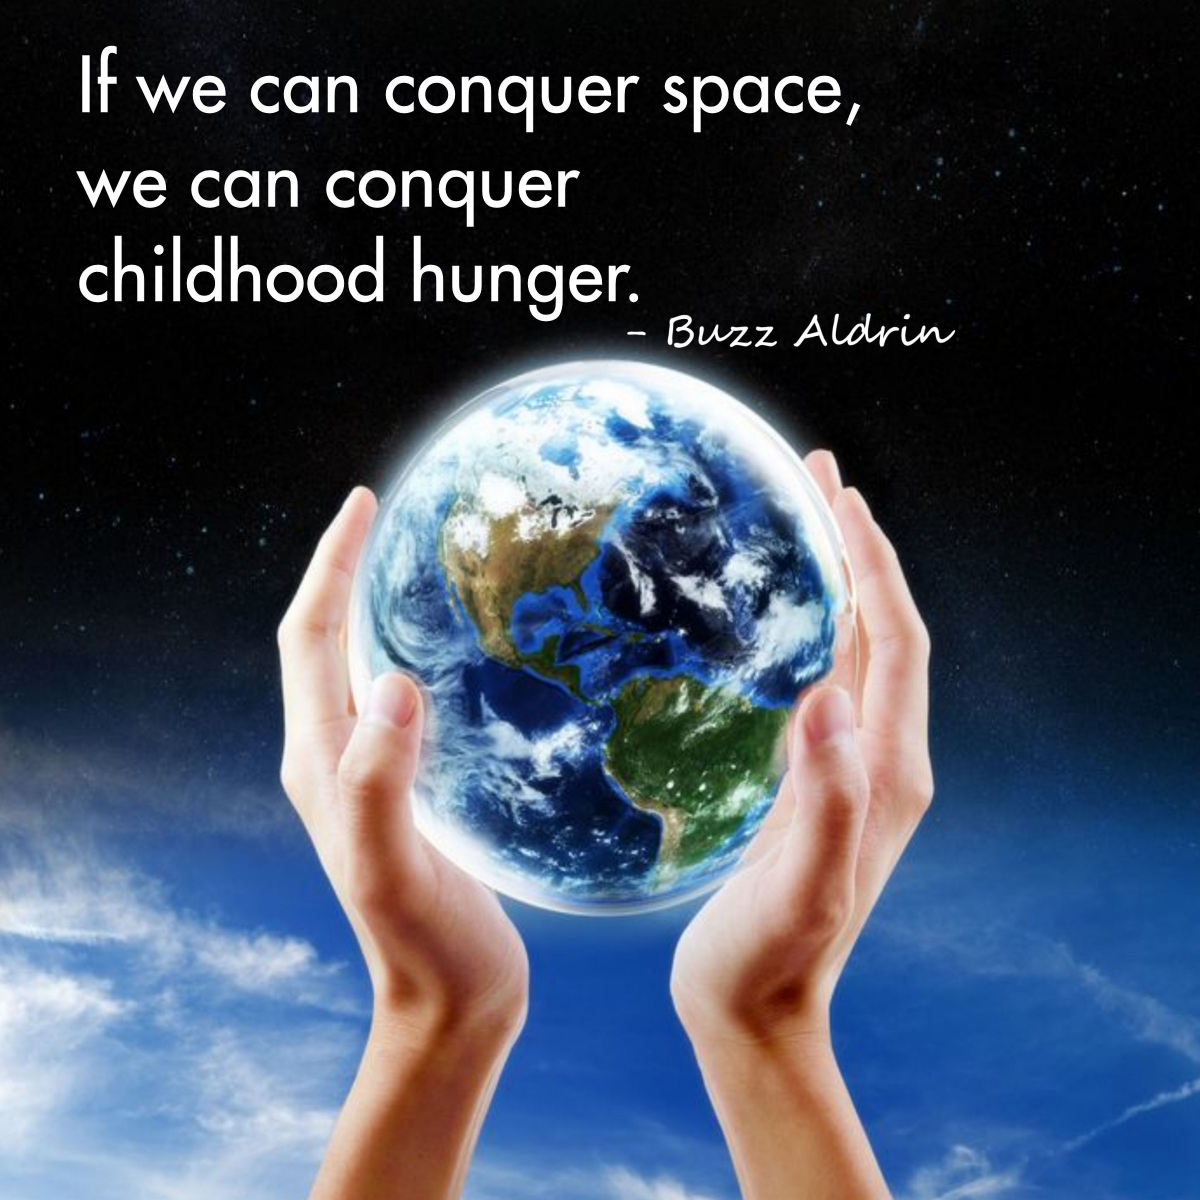 If We Can Conquer Space, We Can Conquer Childhood Hunger. Buzz Aldrin